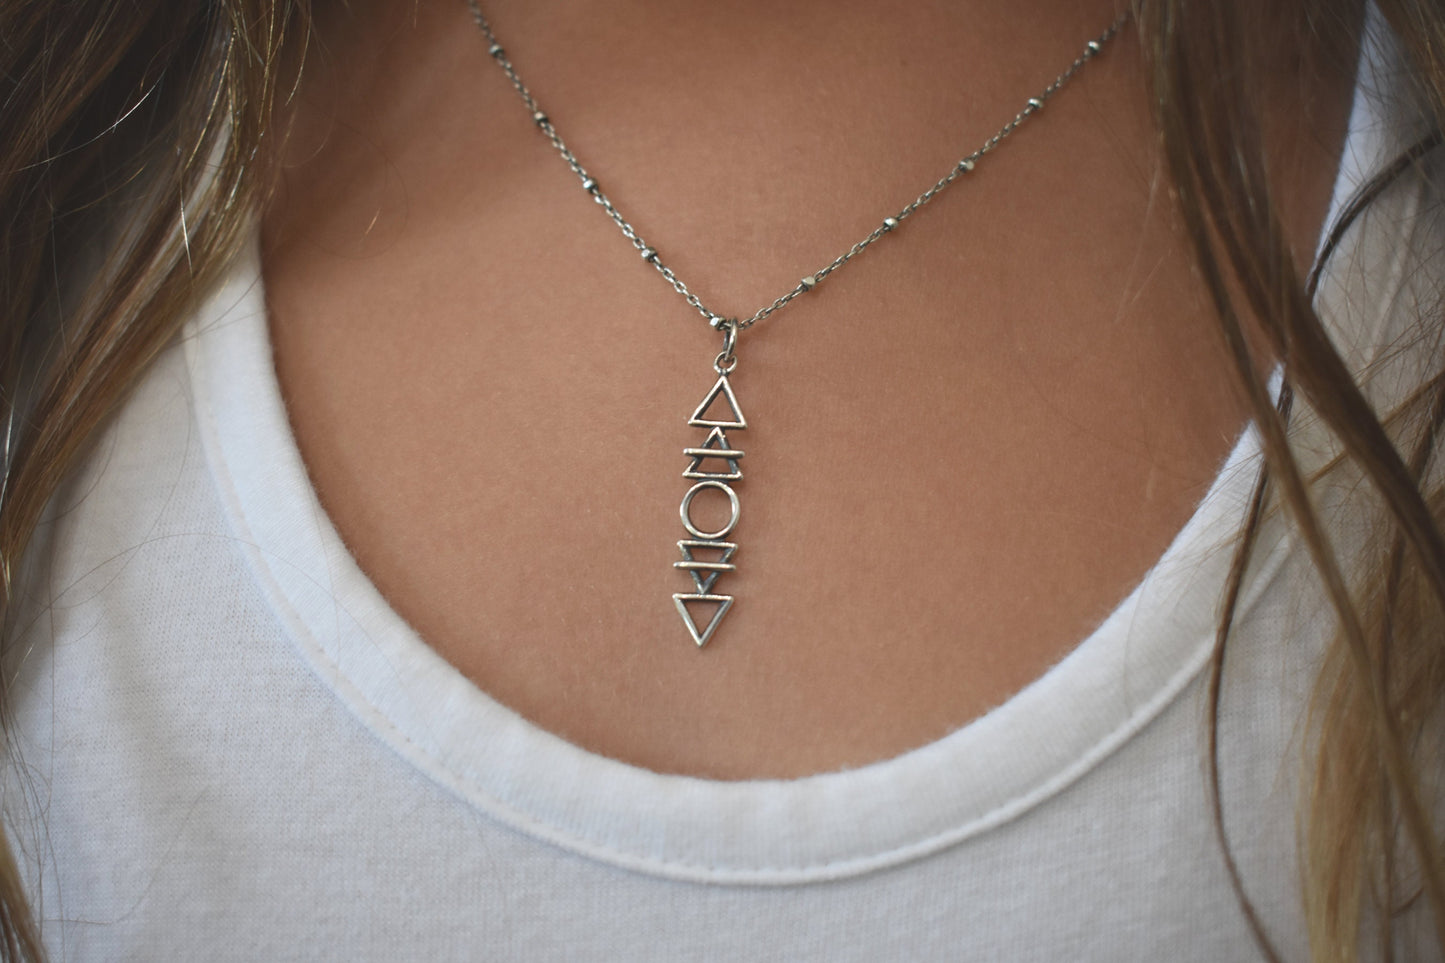 Element Necklace- Four Elements Necklace, Frozen Necklace- Earth Air Fire Water